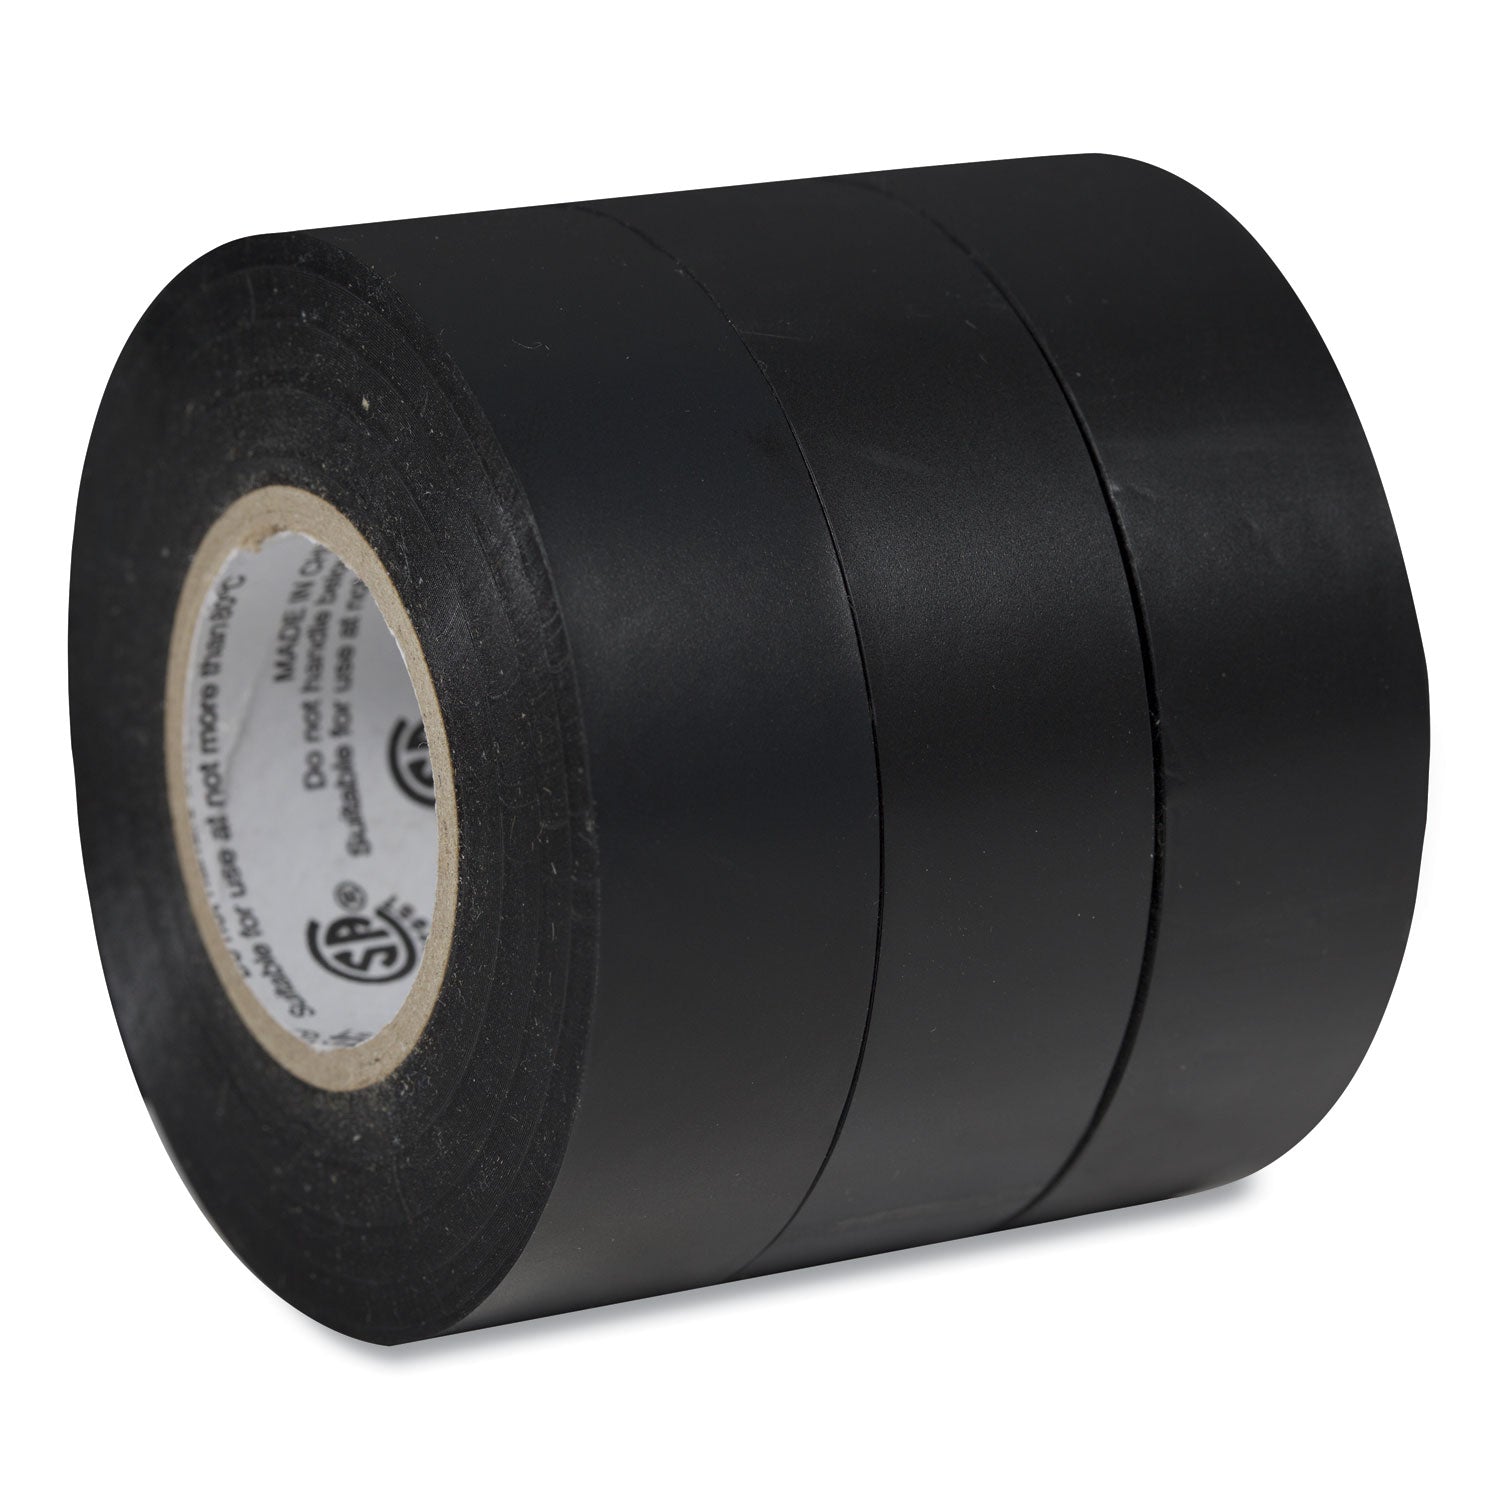 Pro Electrical Tape, 1" Core, 0.75" x 50 ft, Black, 3/Pack - 